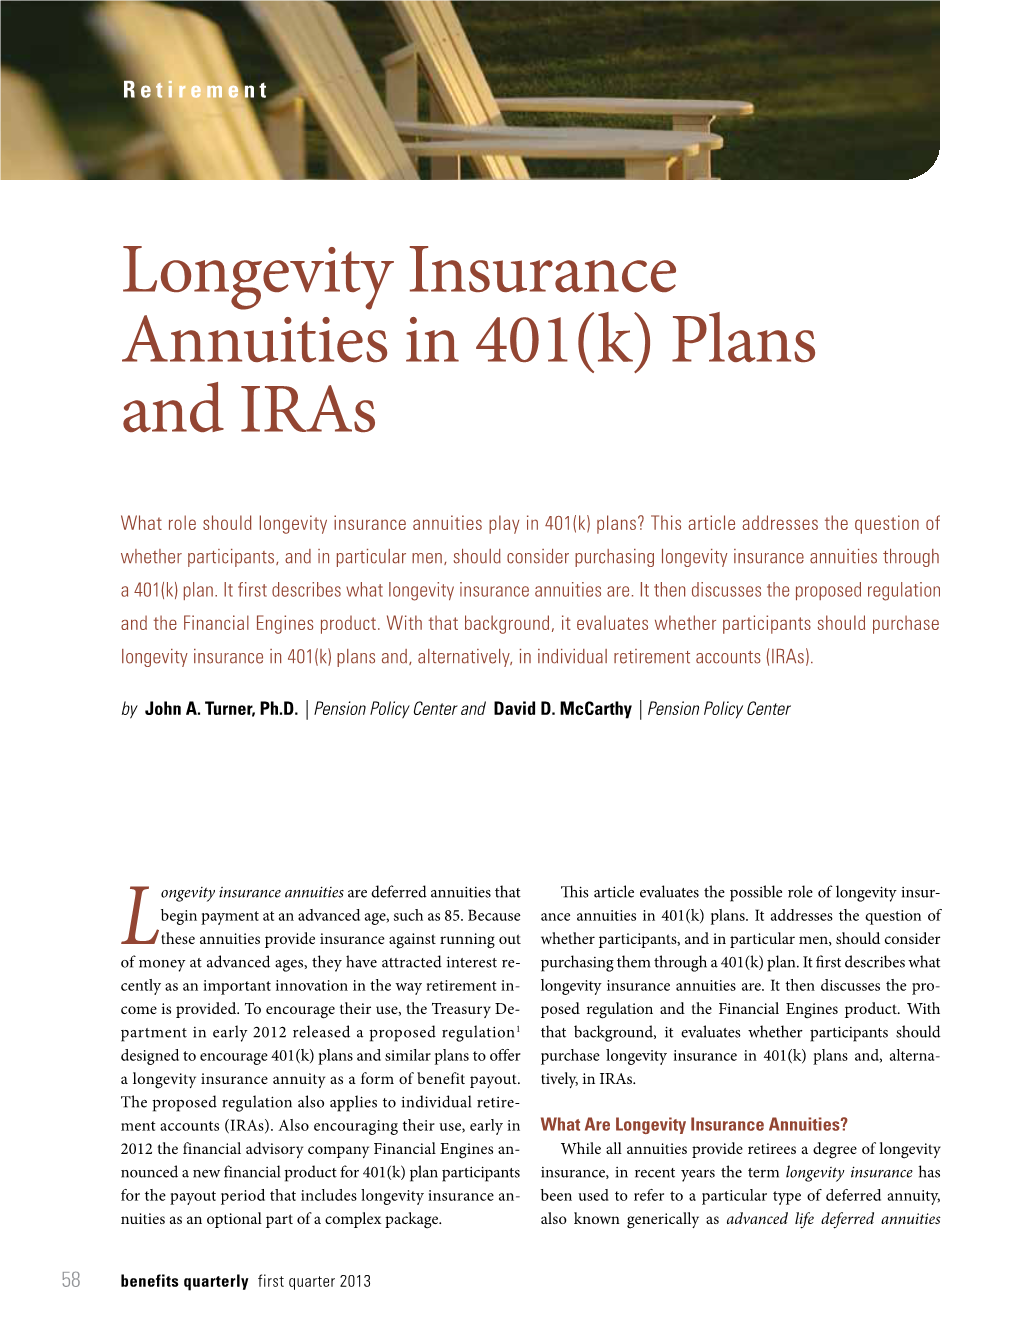 Longevity Insurance Annuities in 401(K) Plans and Iras